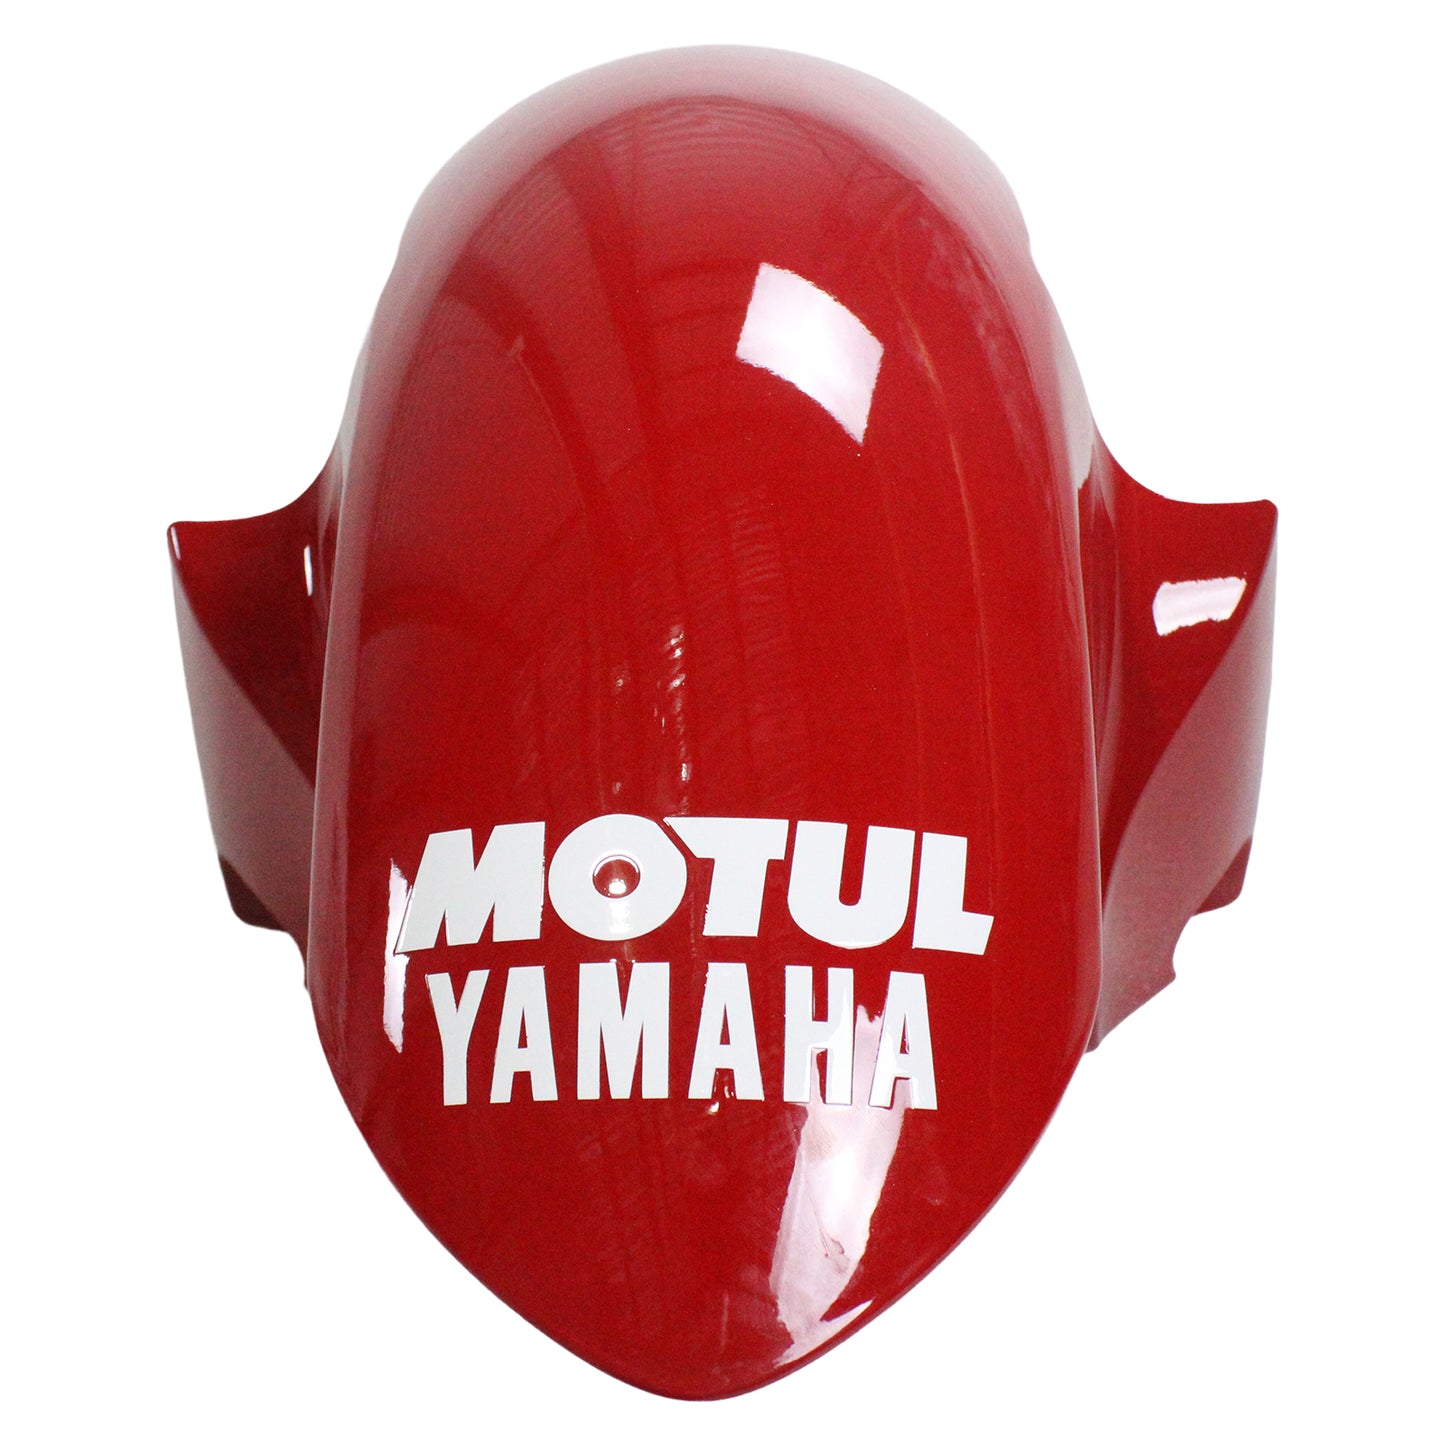 Amotopart Yamaha 2008-2016 YZF 600 R6 White Red Fearing Kit